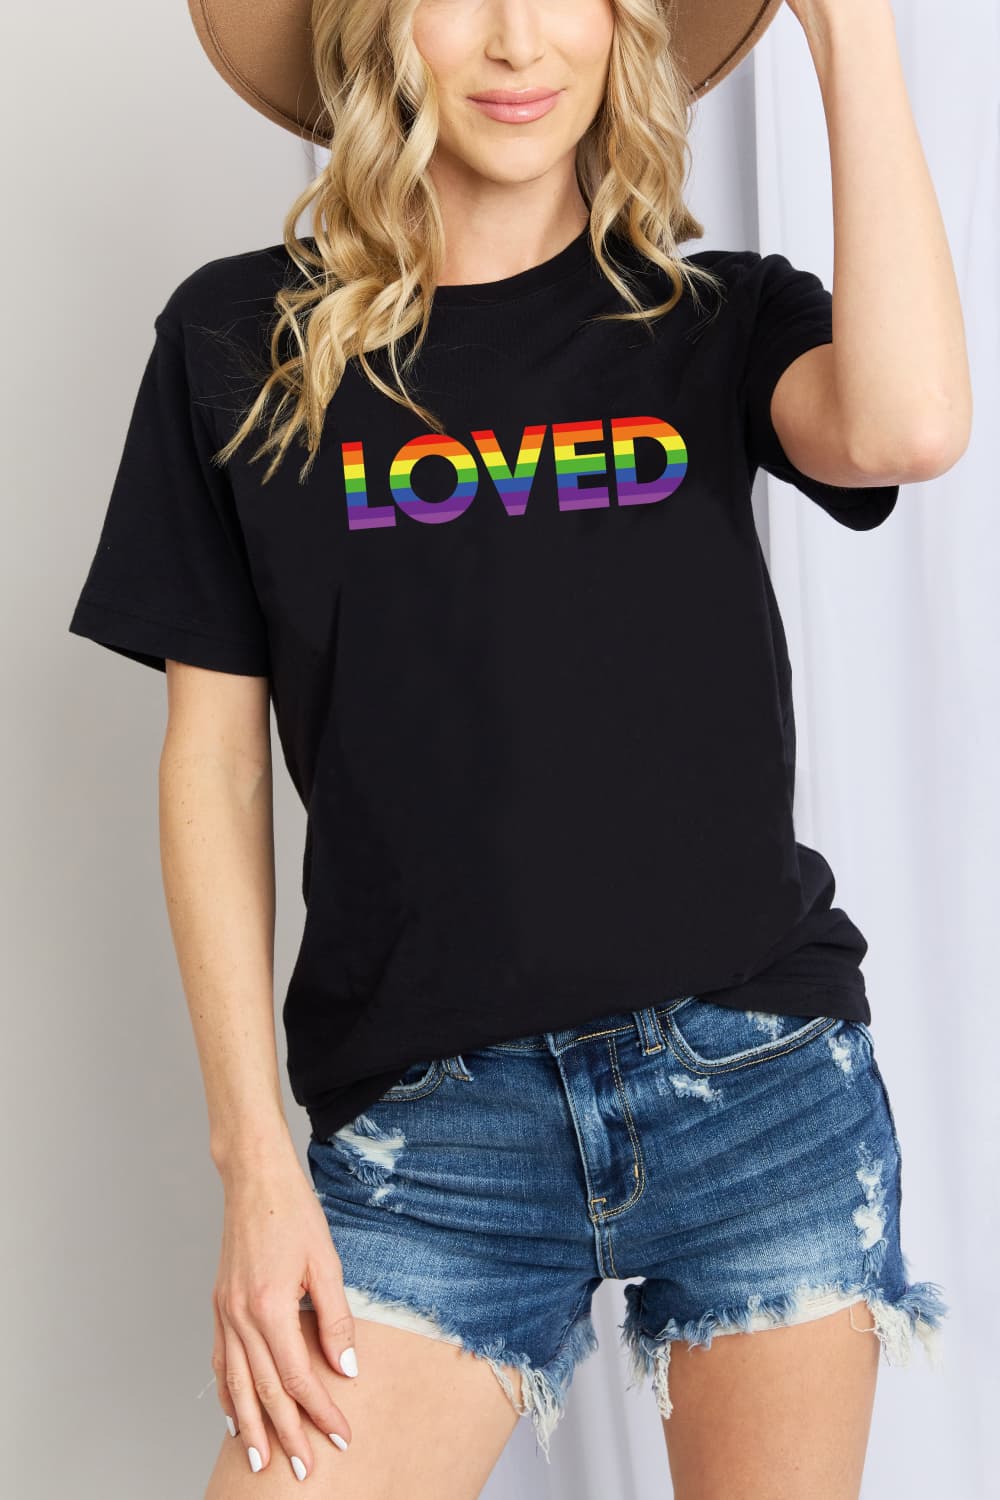 Simply Love, LOVED Graphic Cotton T-Shirt In Black